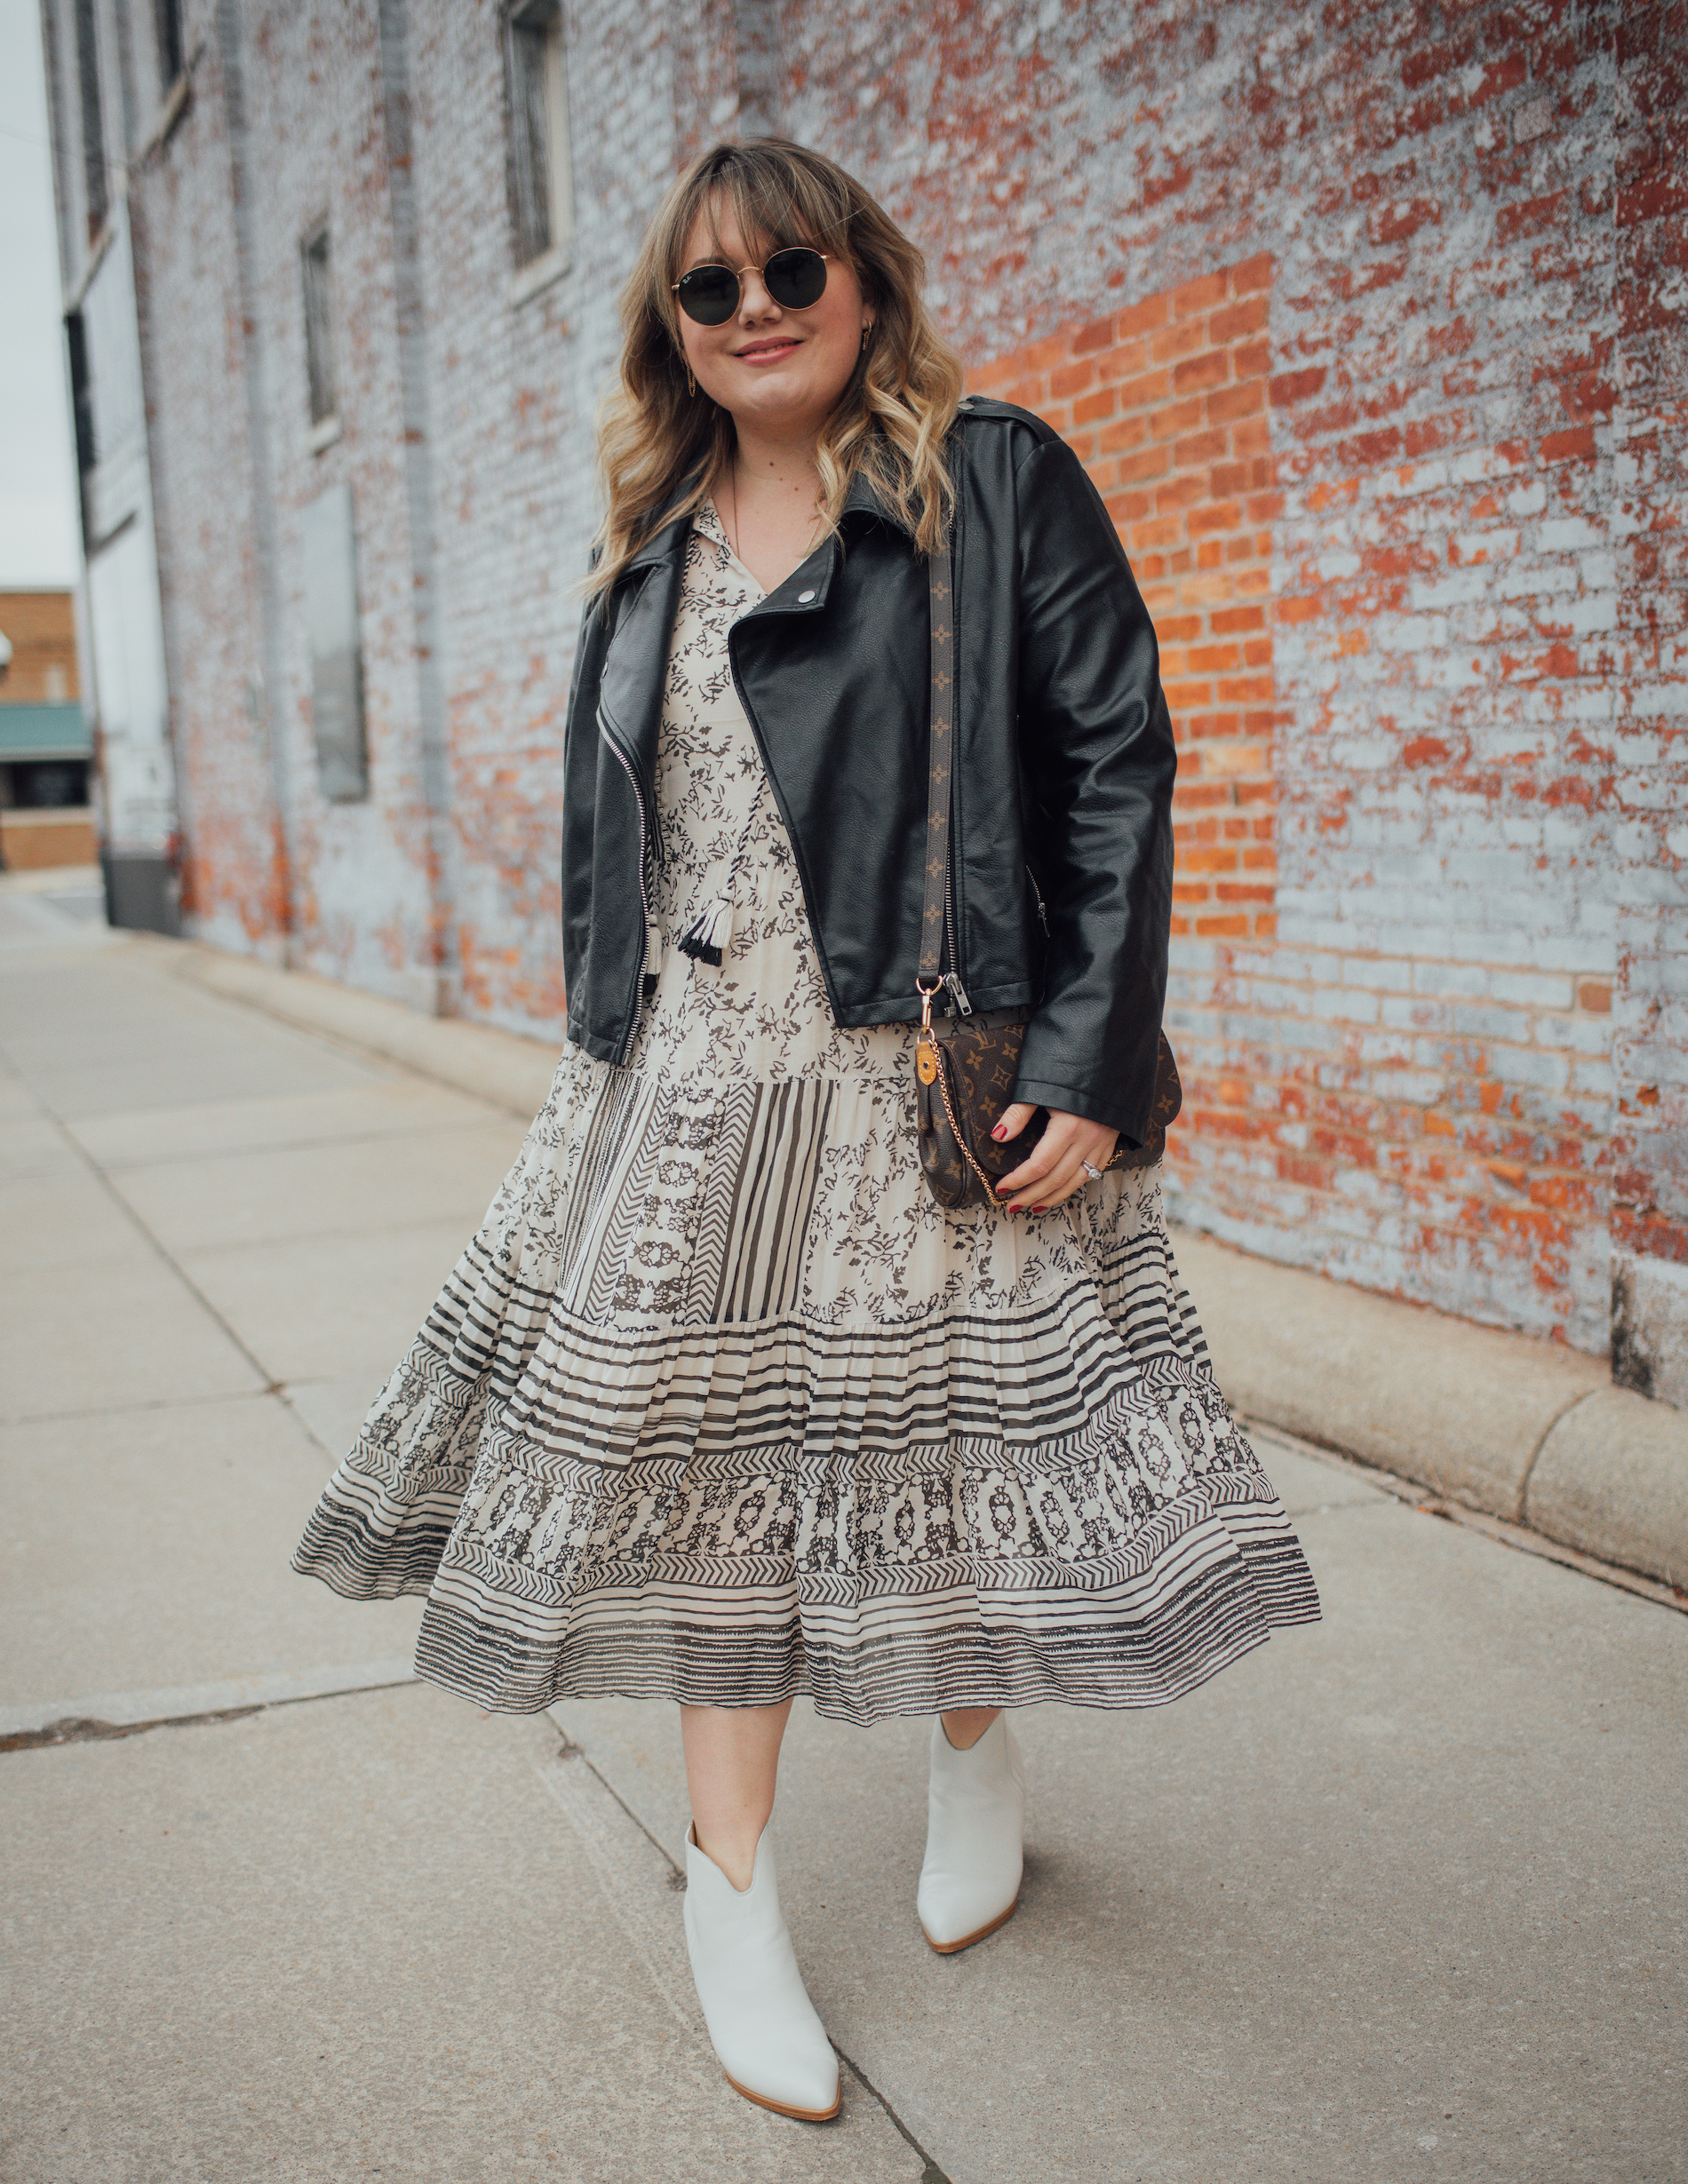 Spring Outfit Formula To Try. Today I am sharing an easy and chic plus size outfit formula to try out, a moto jacket + boho dress + booties! 